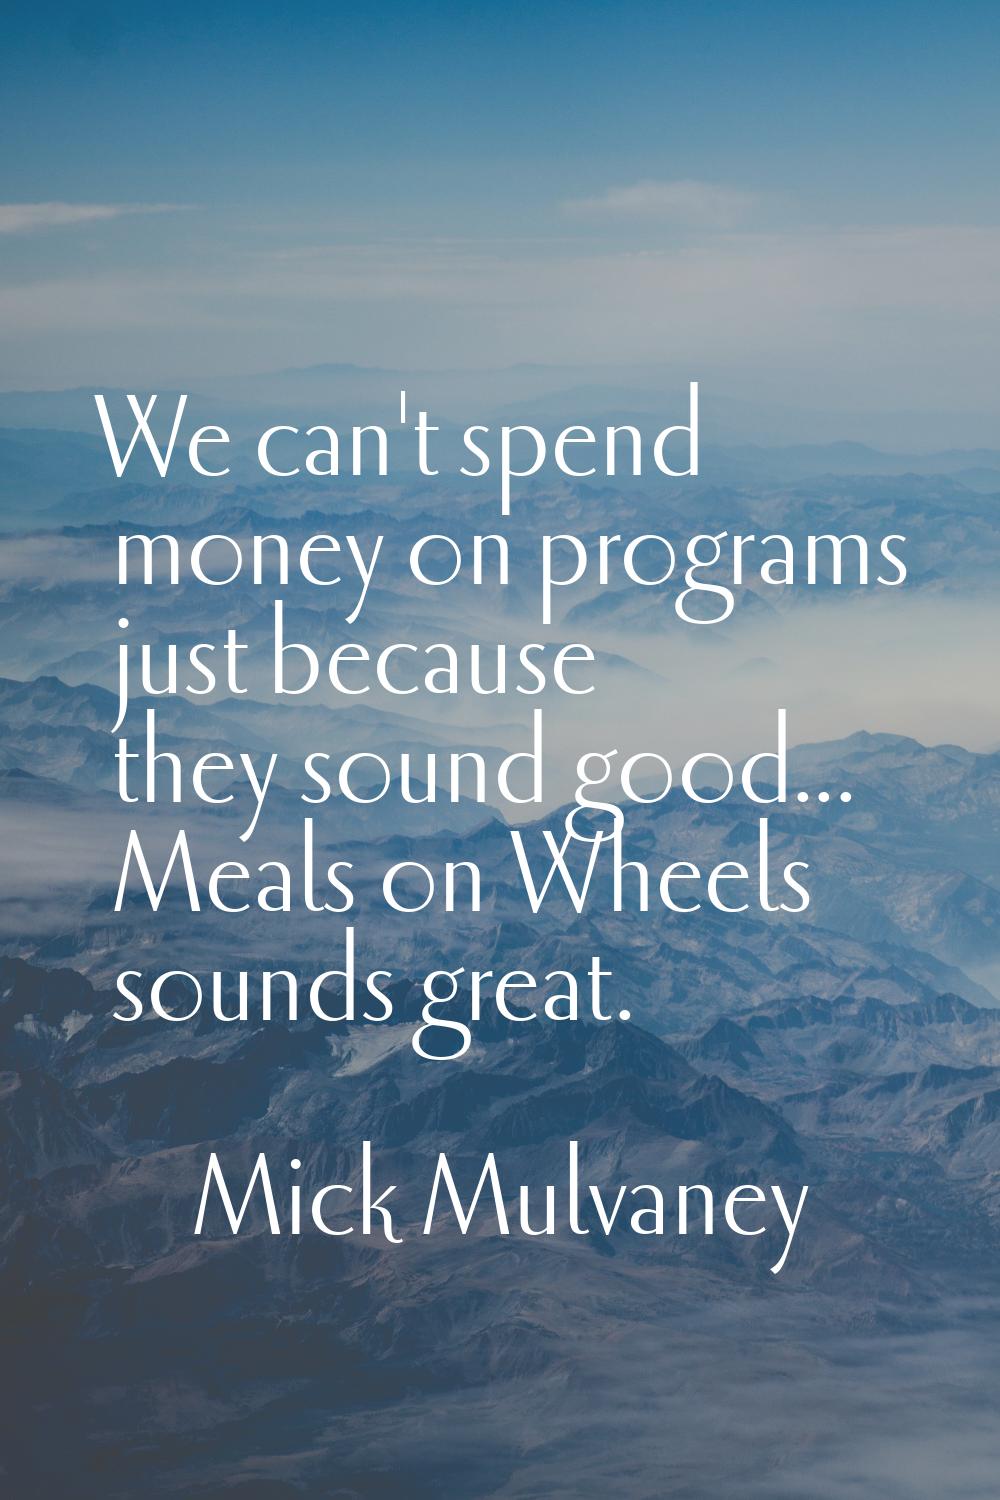 We can't spend money on programs just because they sound good... Meals on Wheels sounds great.